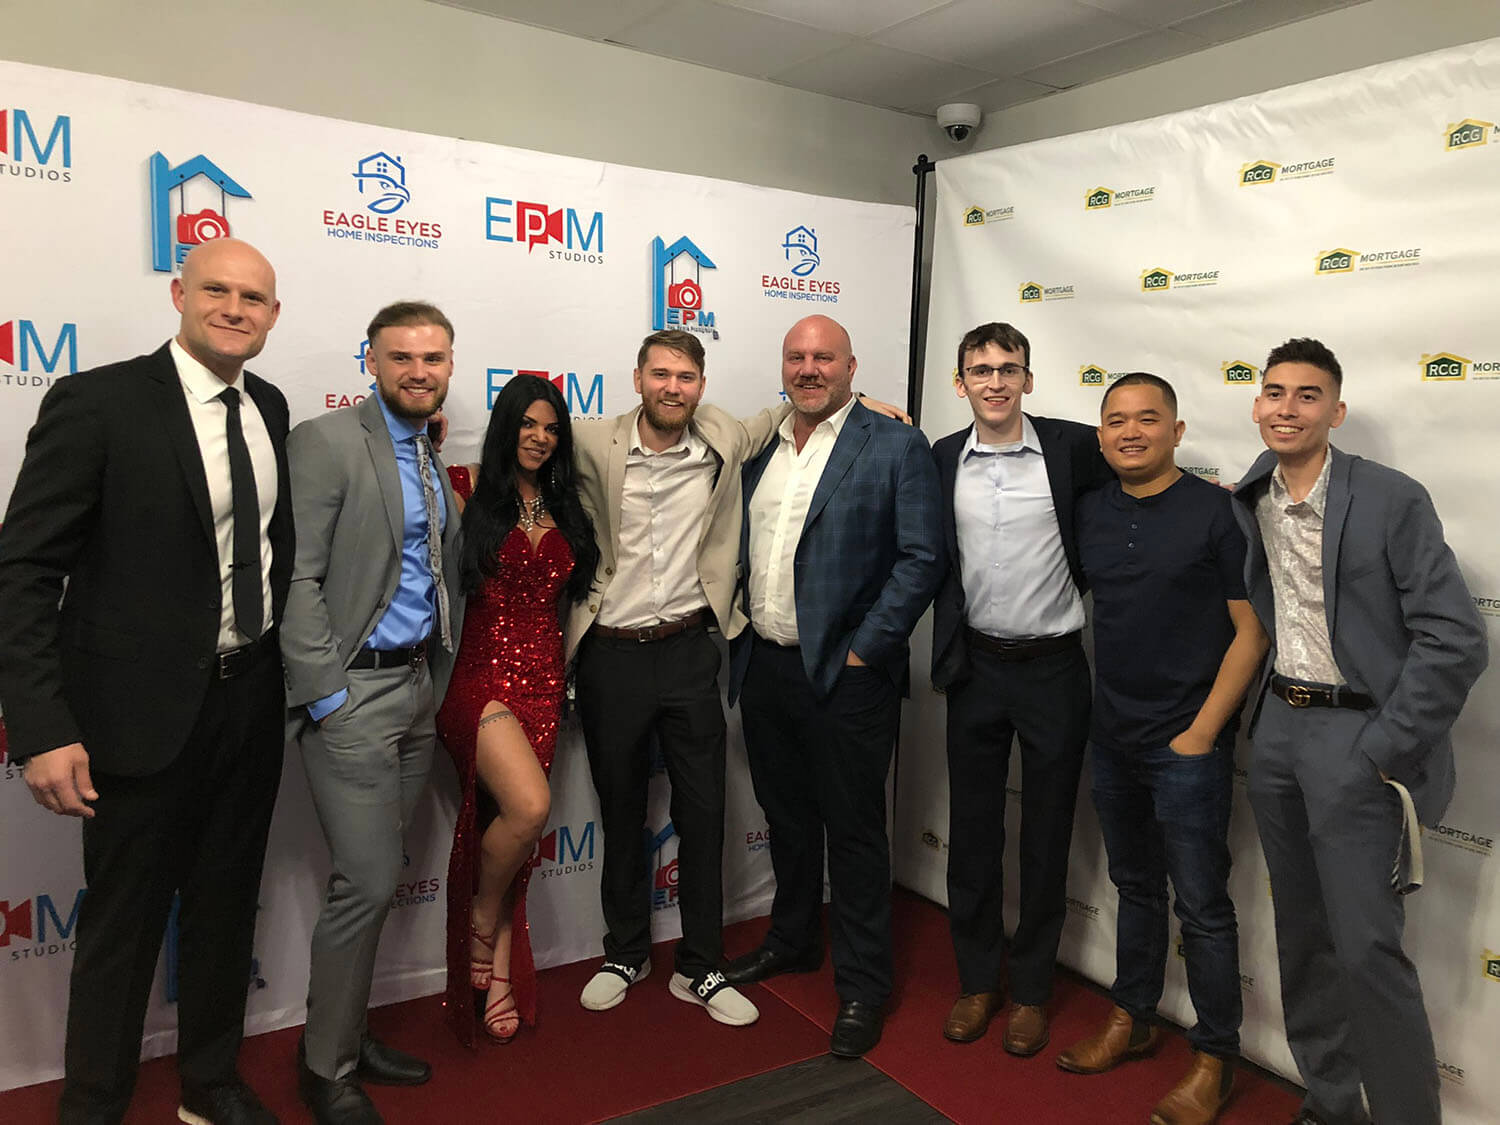 Real Estate Agent Show Finalists Competitors Selected